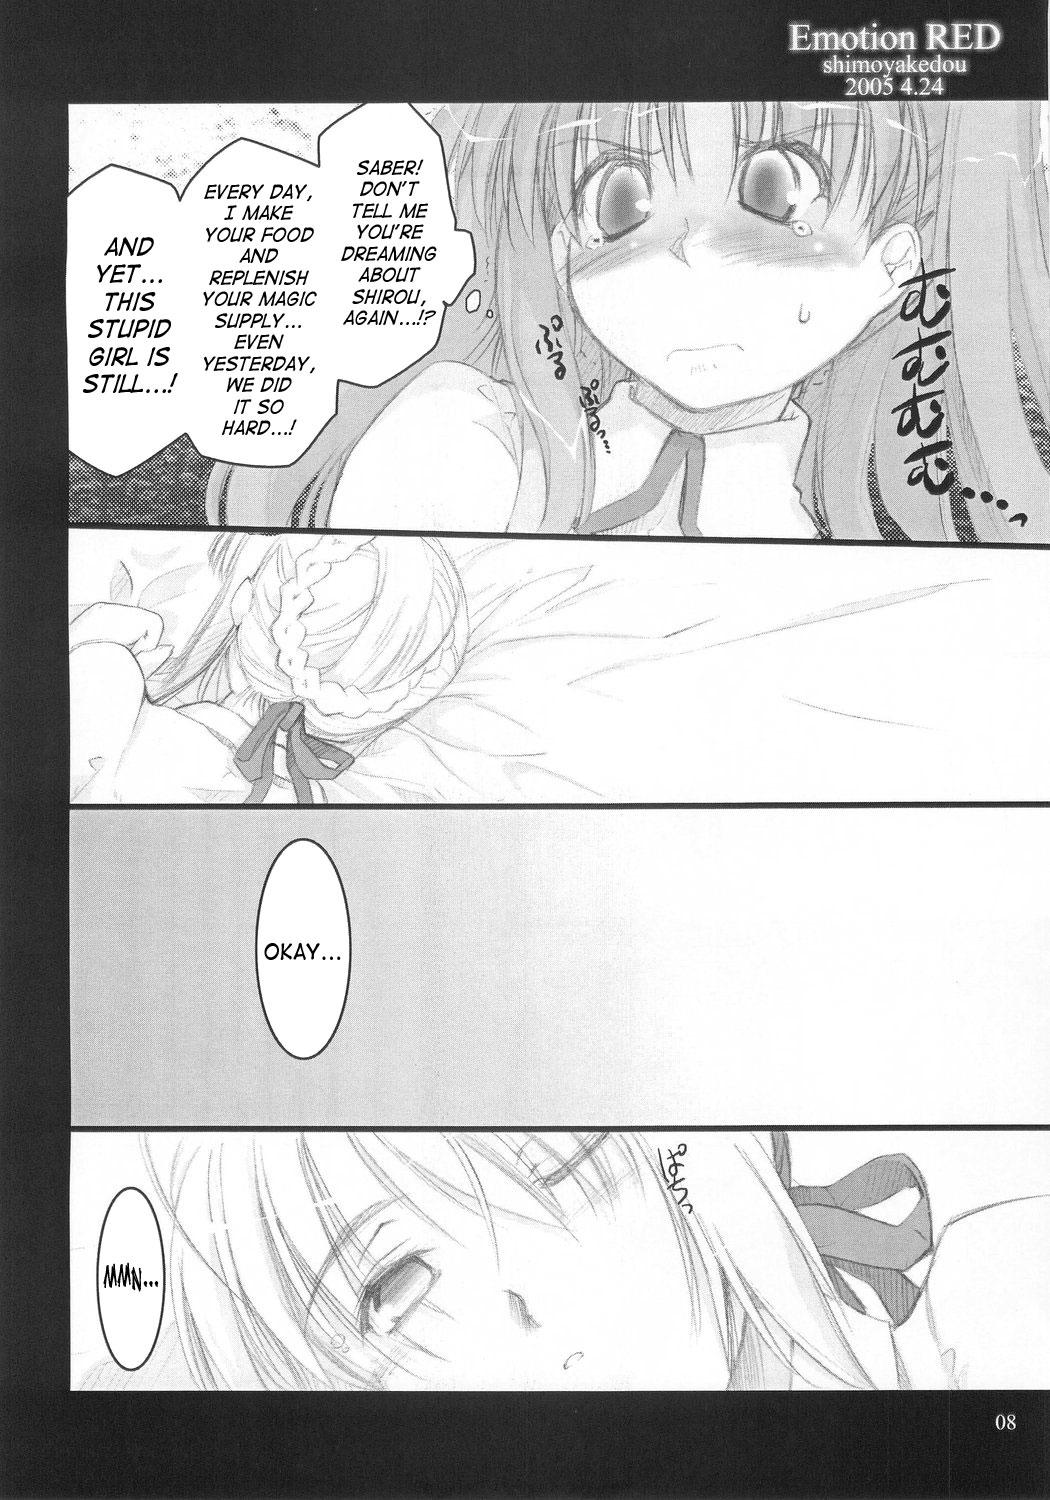 Gay Emo Emotion RED - Fate stay night Wet - Page 7